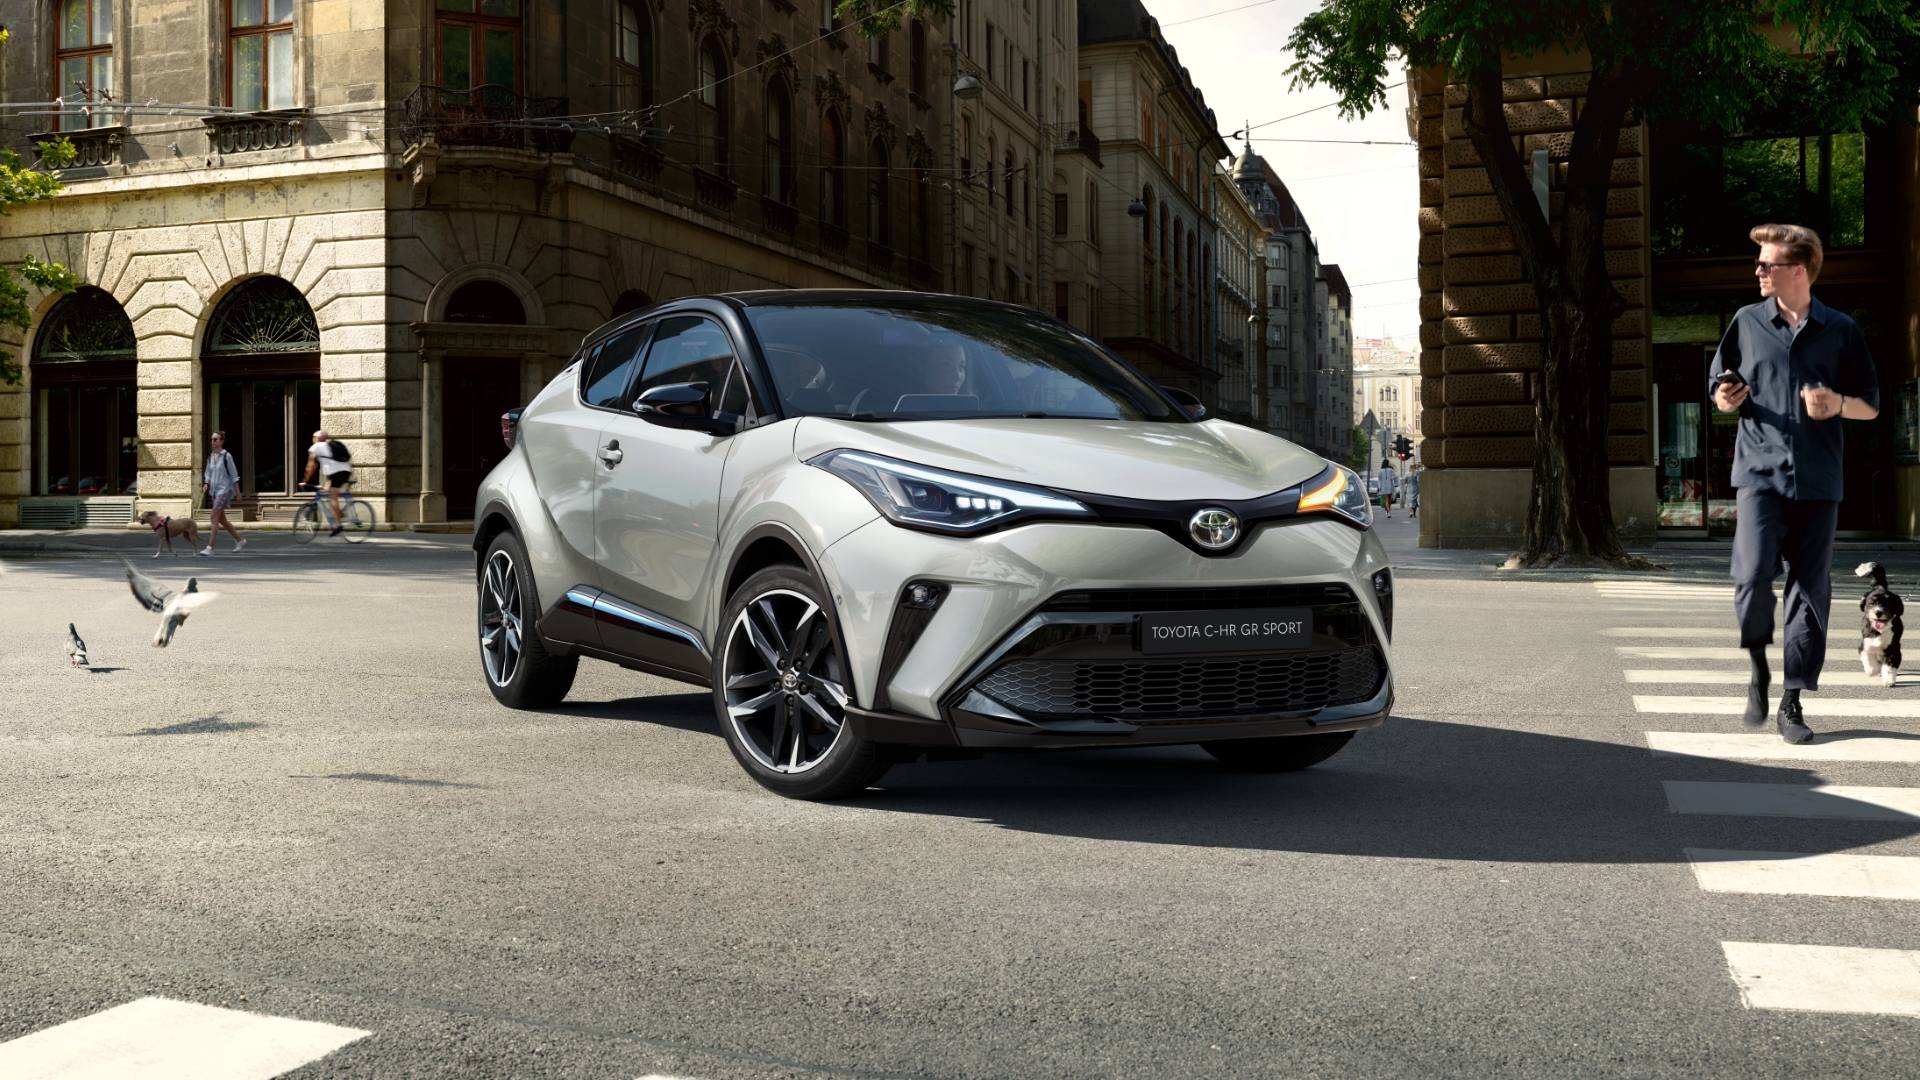 toyota-chr-driving-along-road-people-staring-1920x1080-1